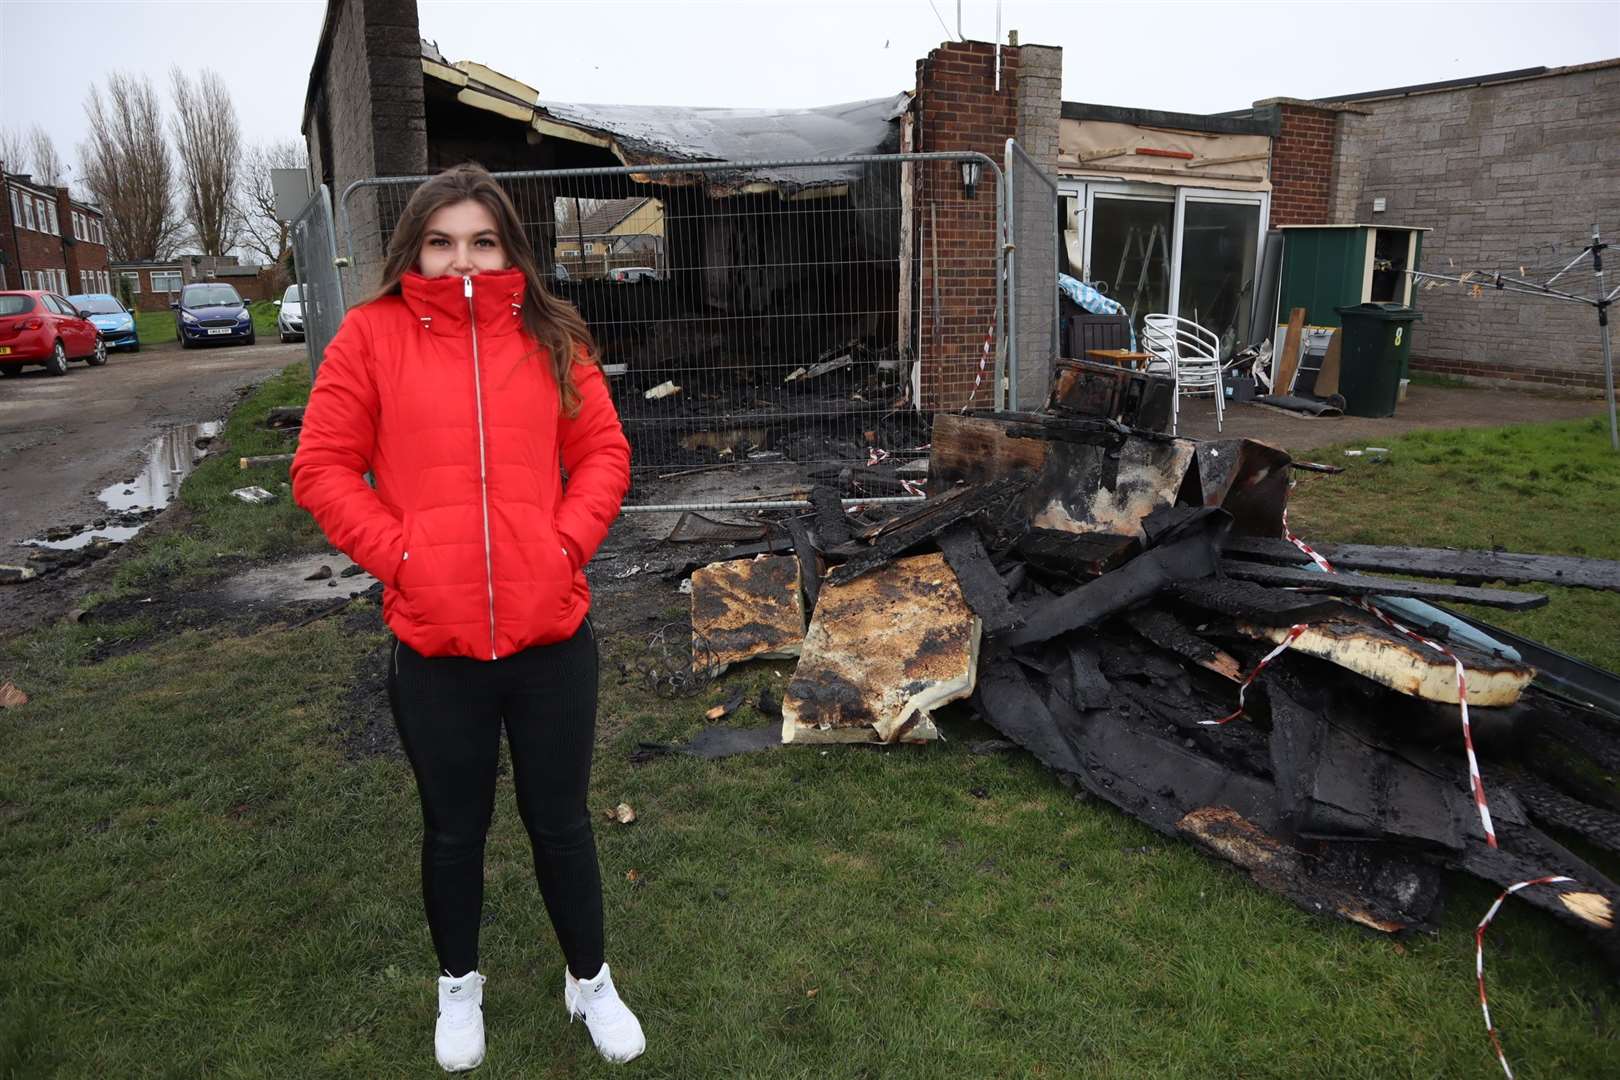 Deni Kerswell, 20, returns to the gutted remains of her chalet fire in Leysdown, Sheppey